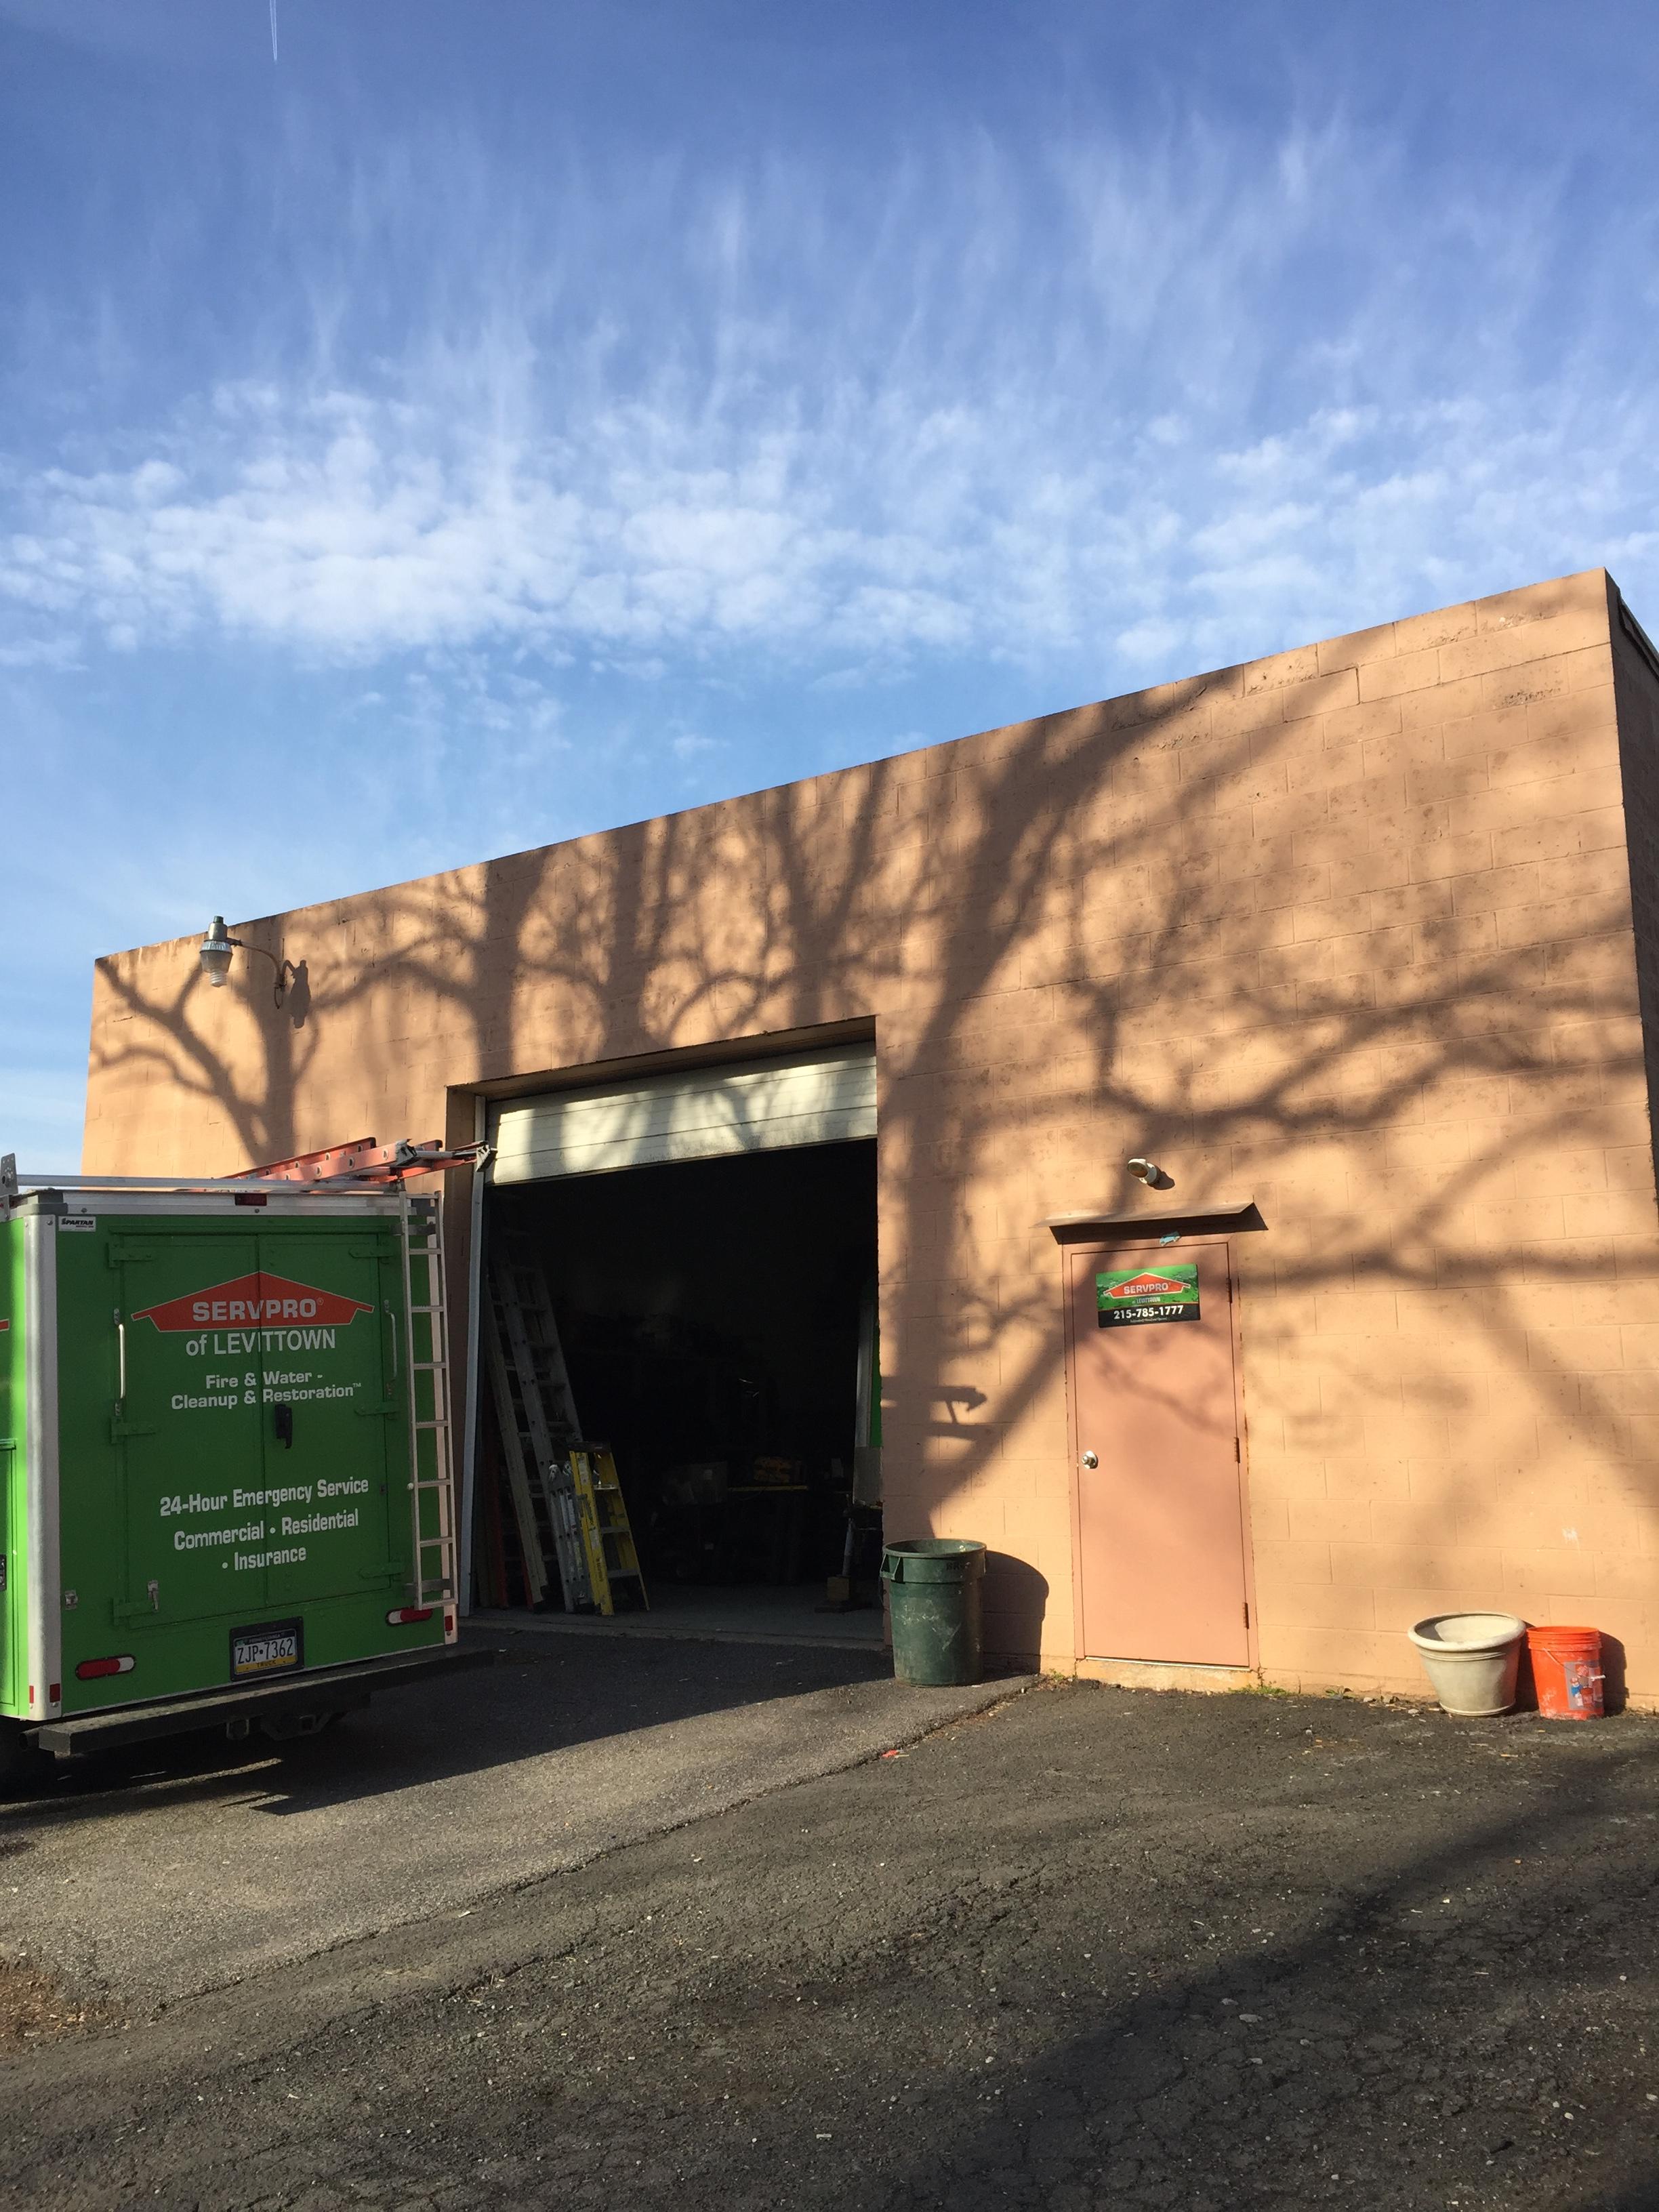 Ready for a busy day! SERVPRO of Levittown is ALWAYS ready to respond.